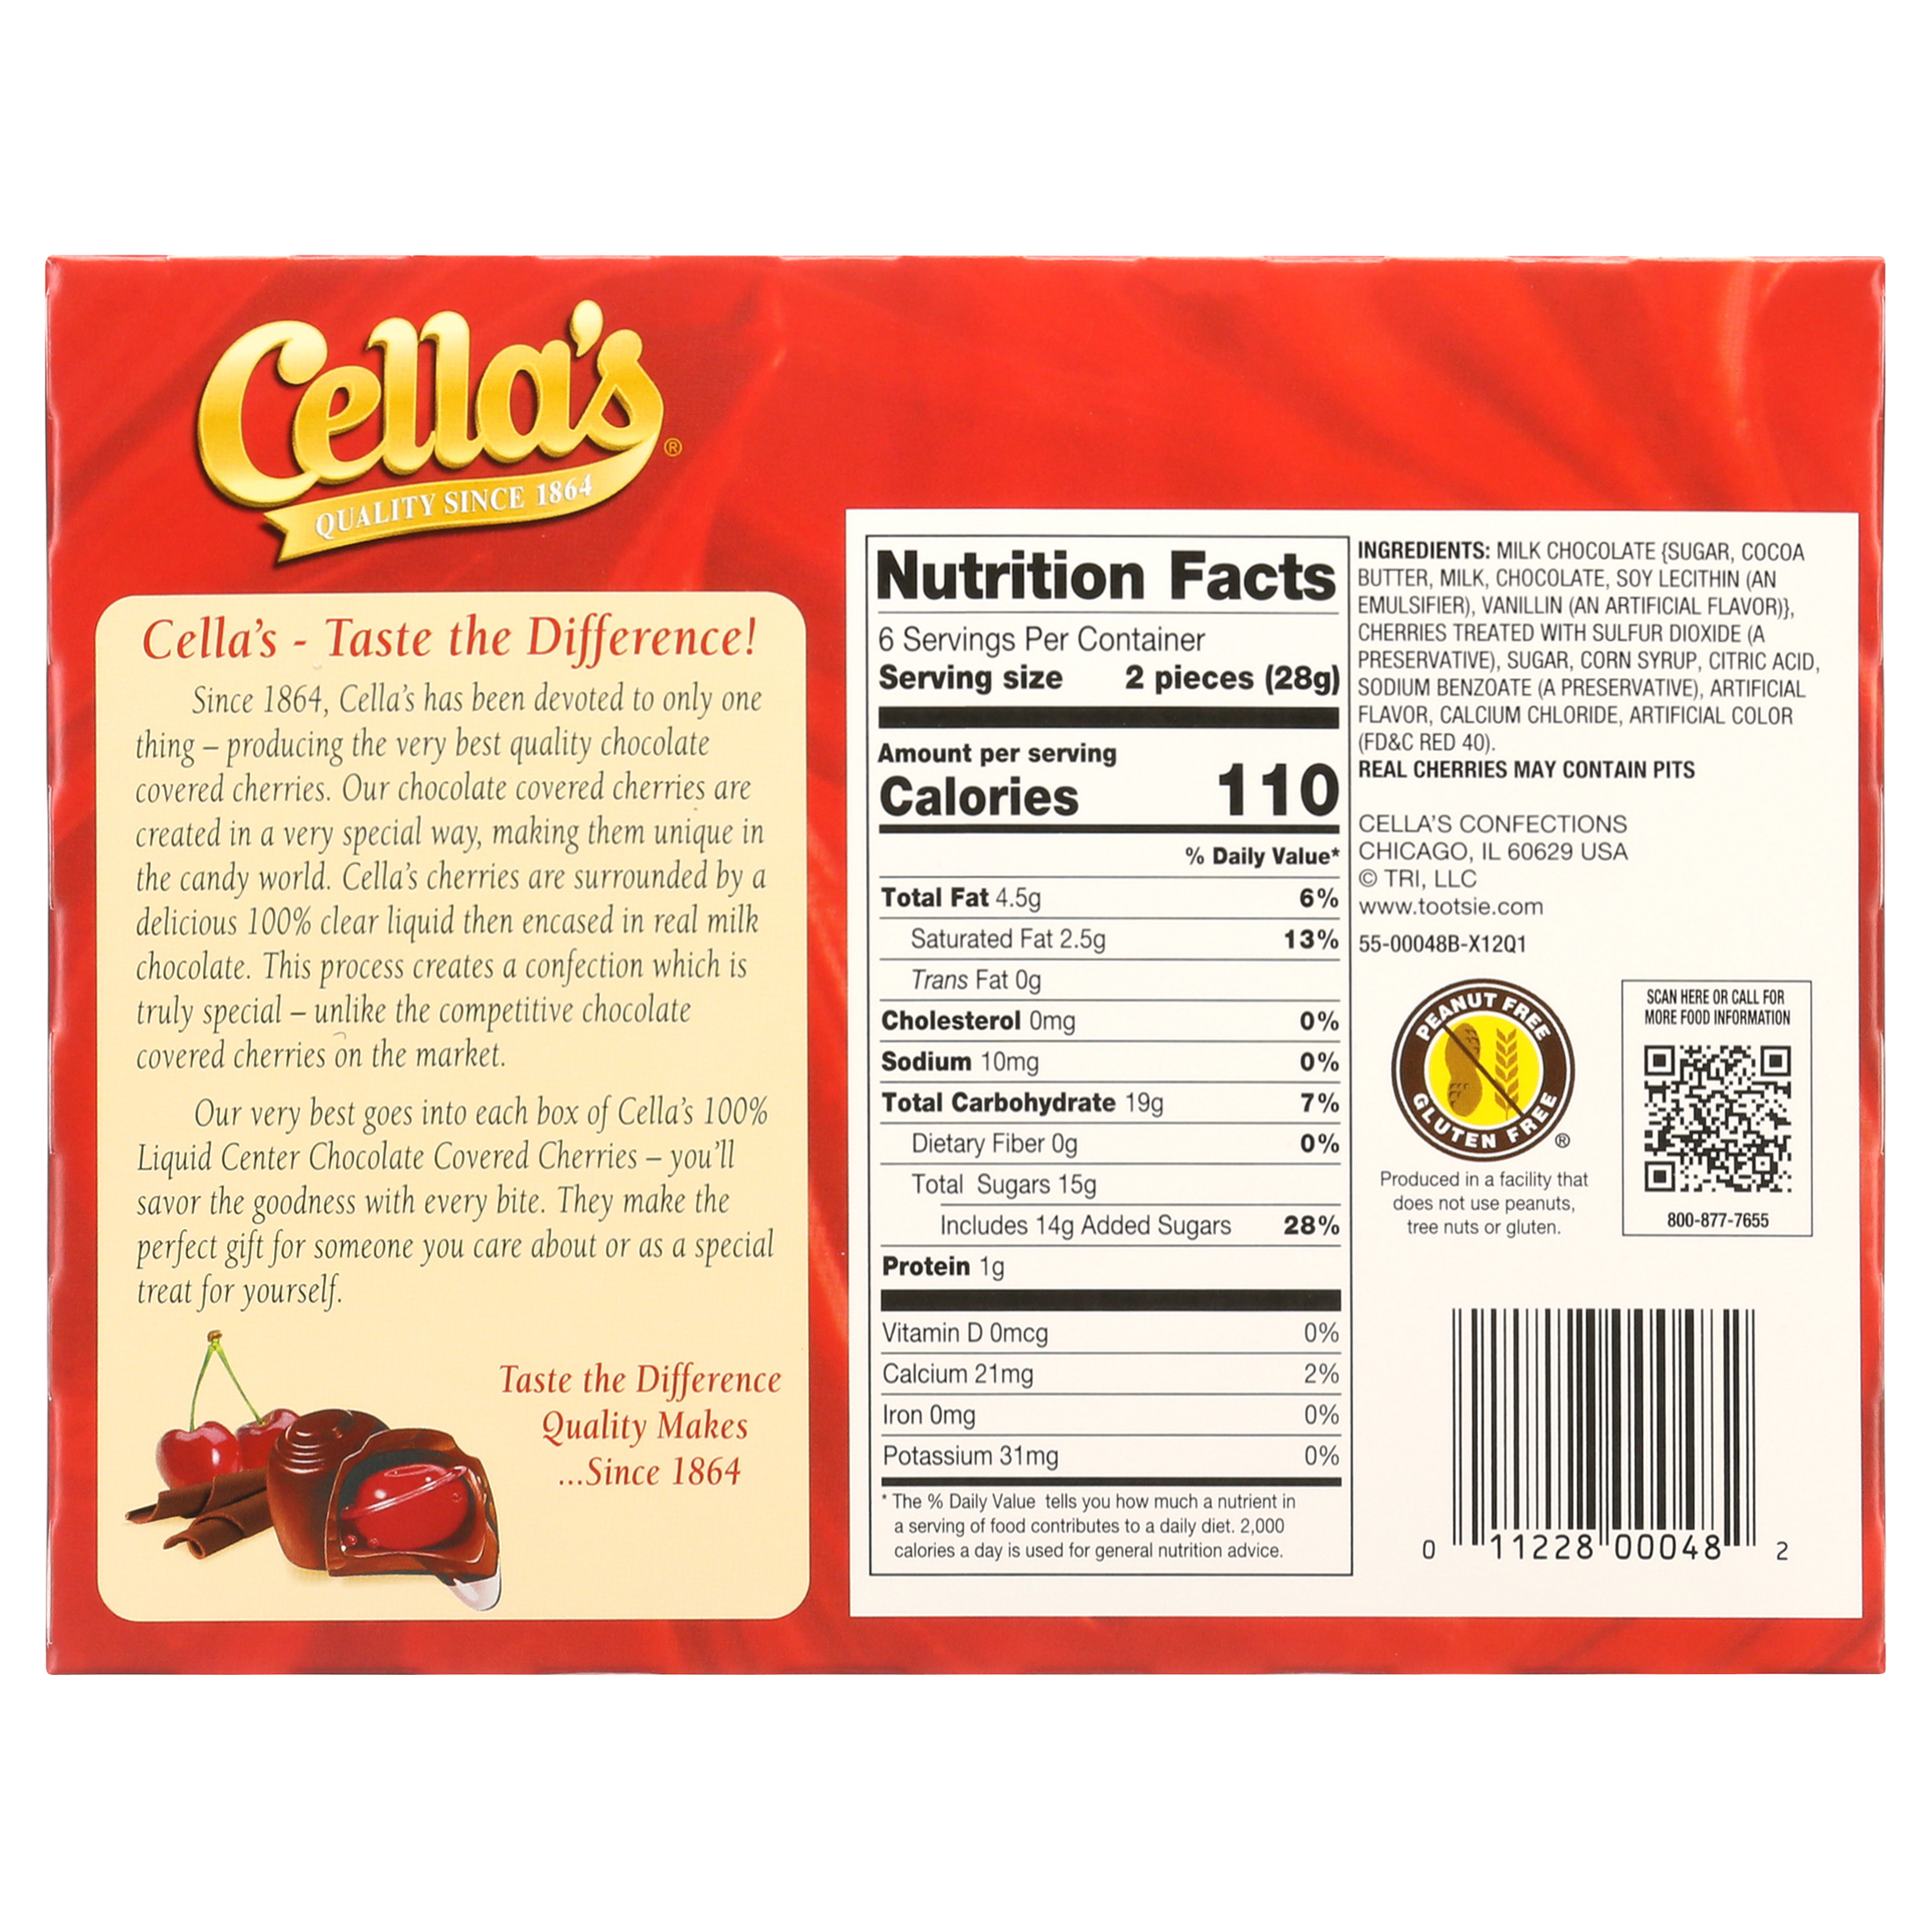 Cella's Holiday Milk Chocolate Covered Cherries , 6 oz, 12 Count - image 5 of 9